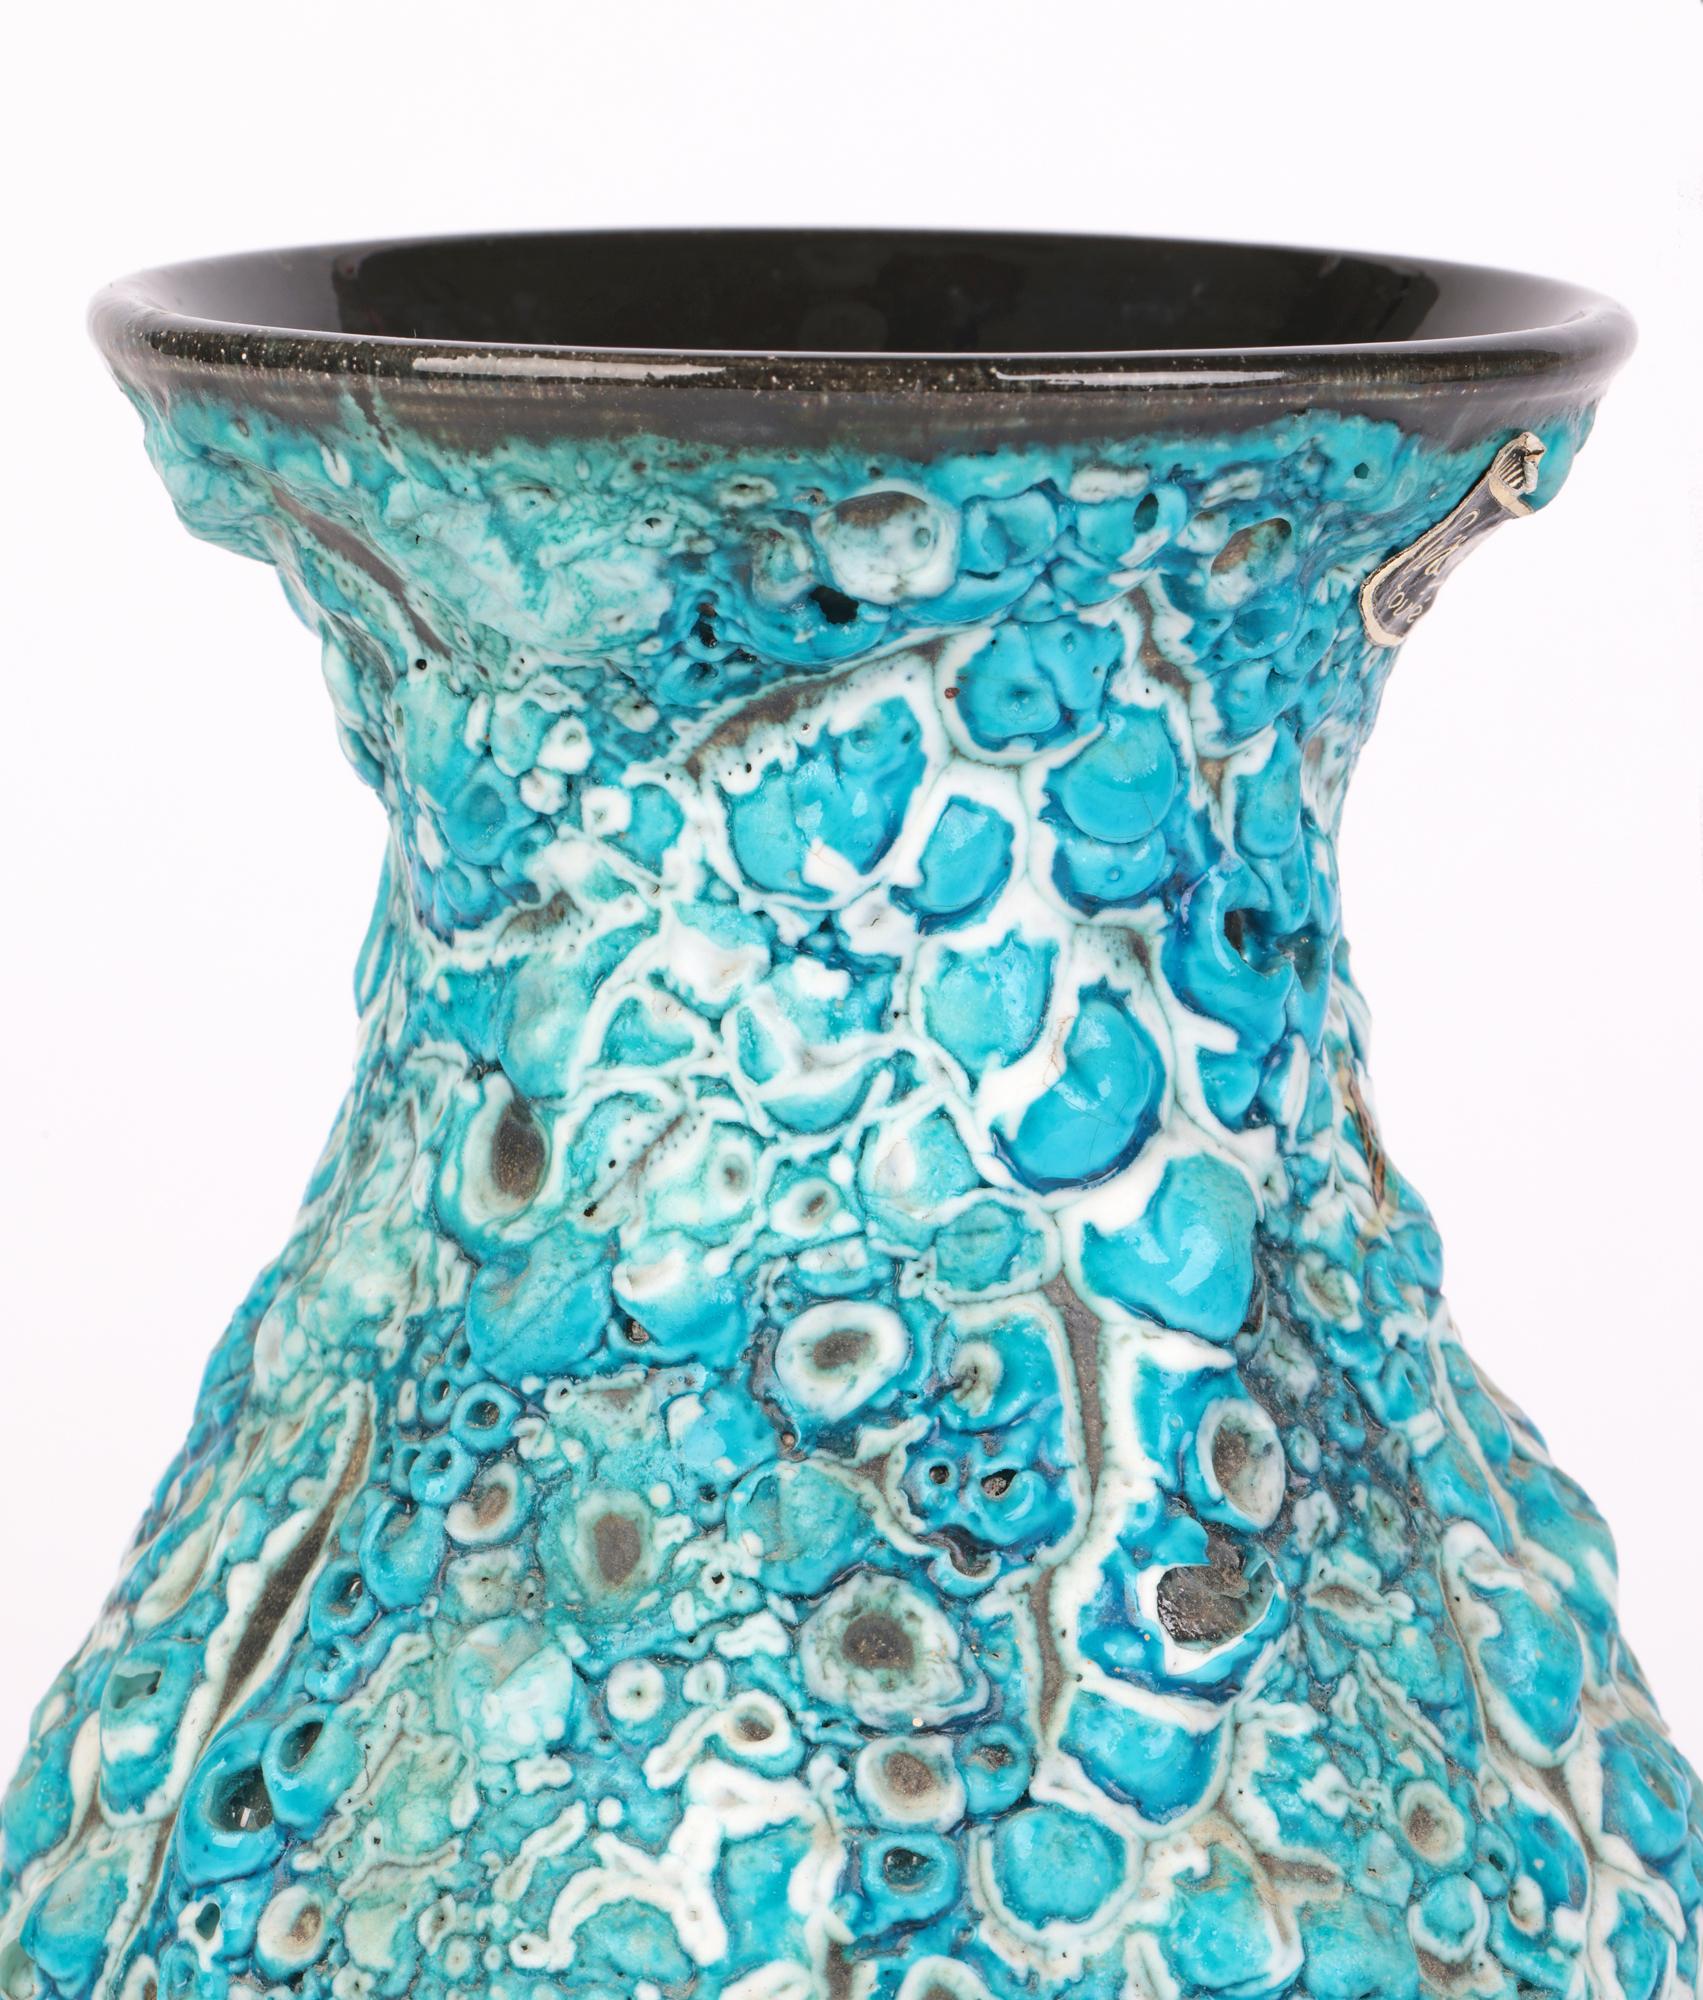 A stylish French mid-century art pottery vase decorated with turquoise lava glazes and produced by l'Atelier du Cyclope made in Annecy. The ceramic vase is lightly potted and stands on a narrow flat round unglazed base with a round body pinched neck